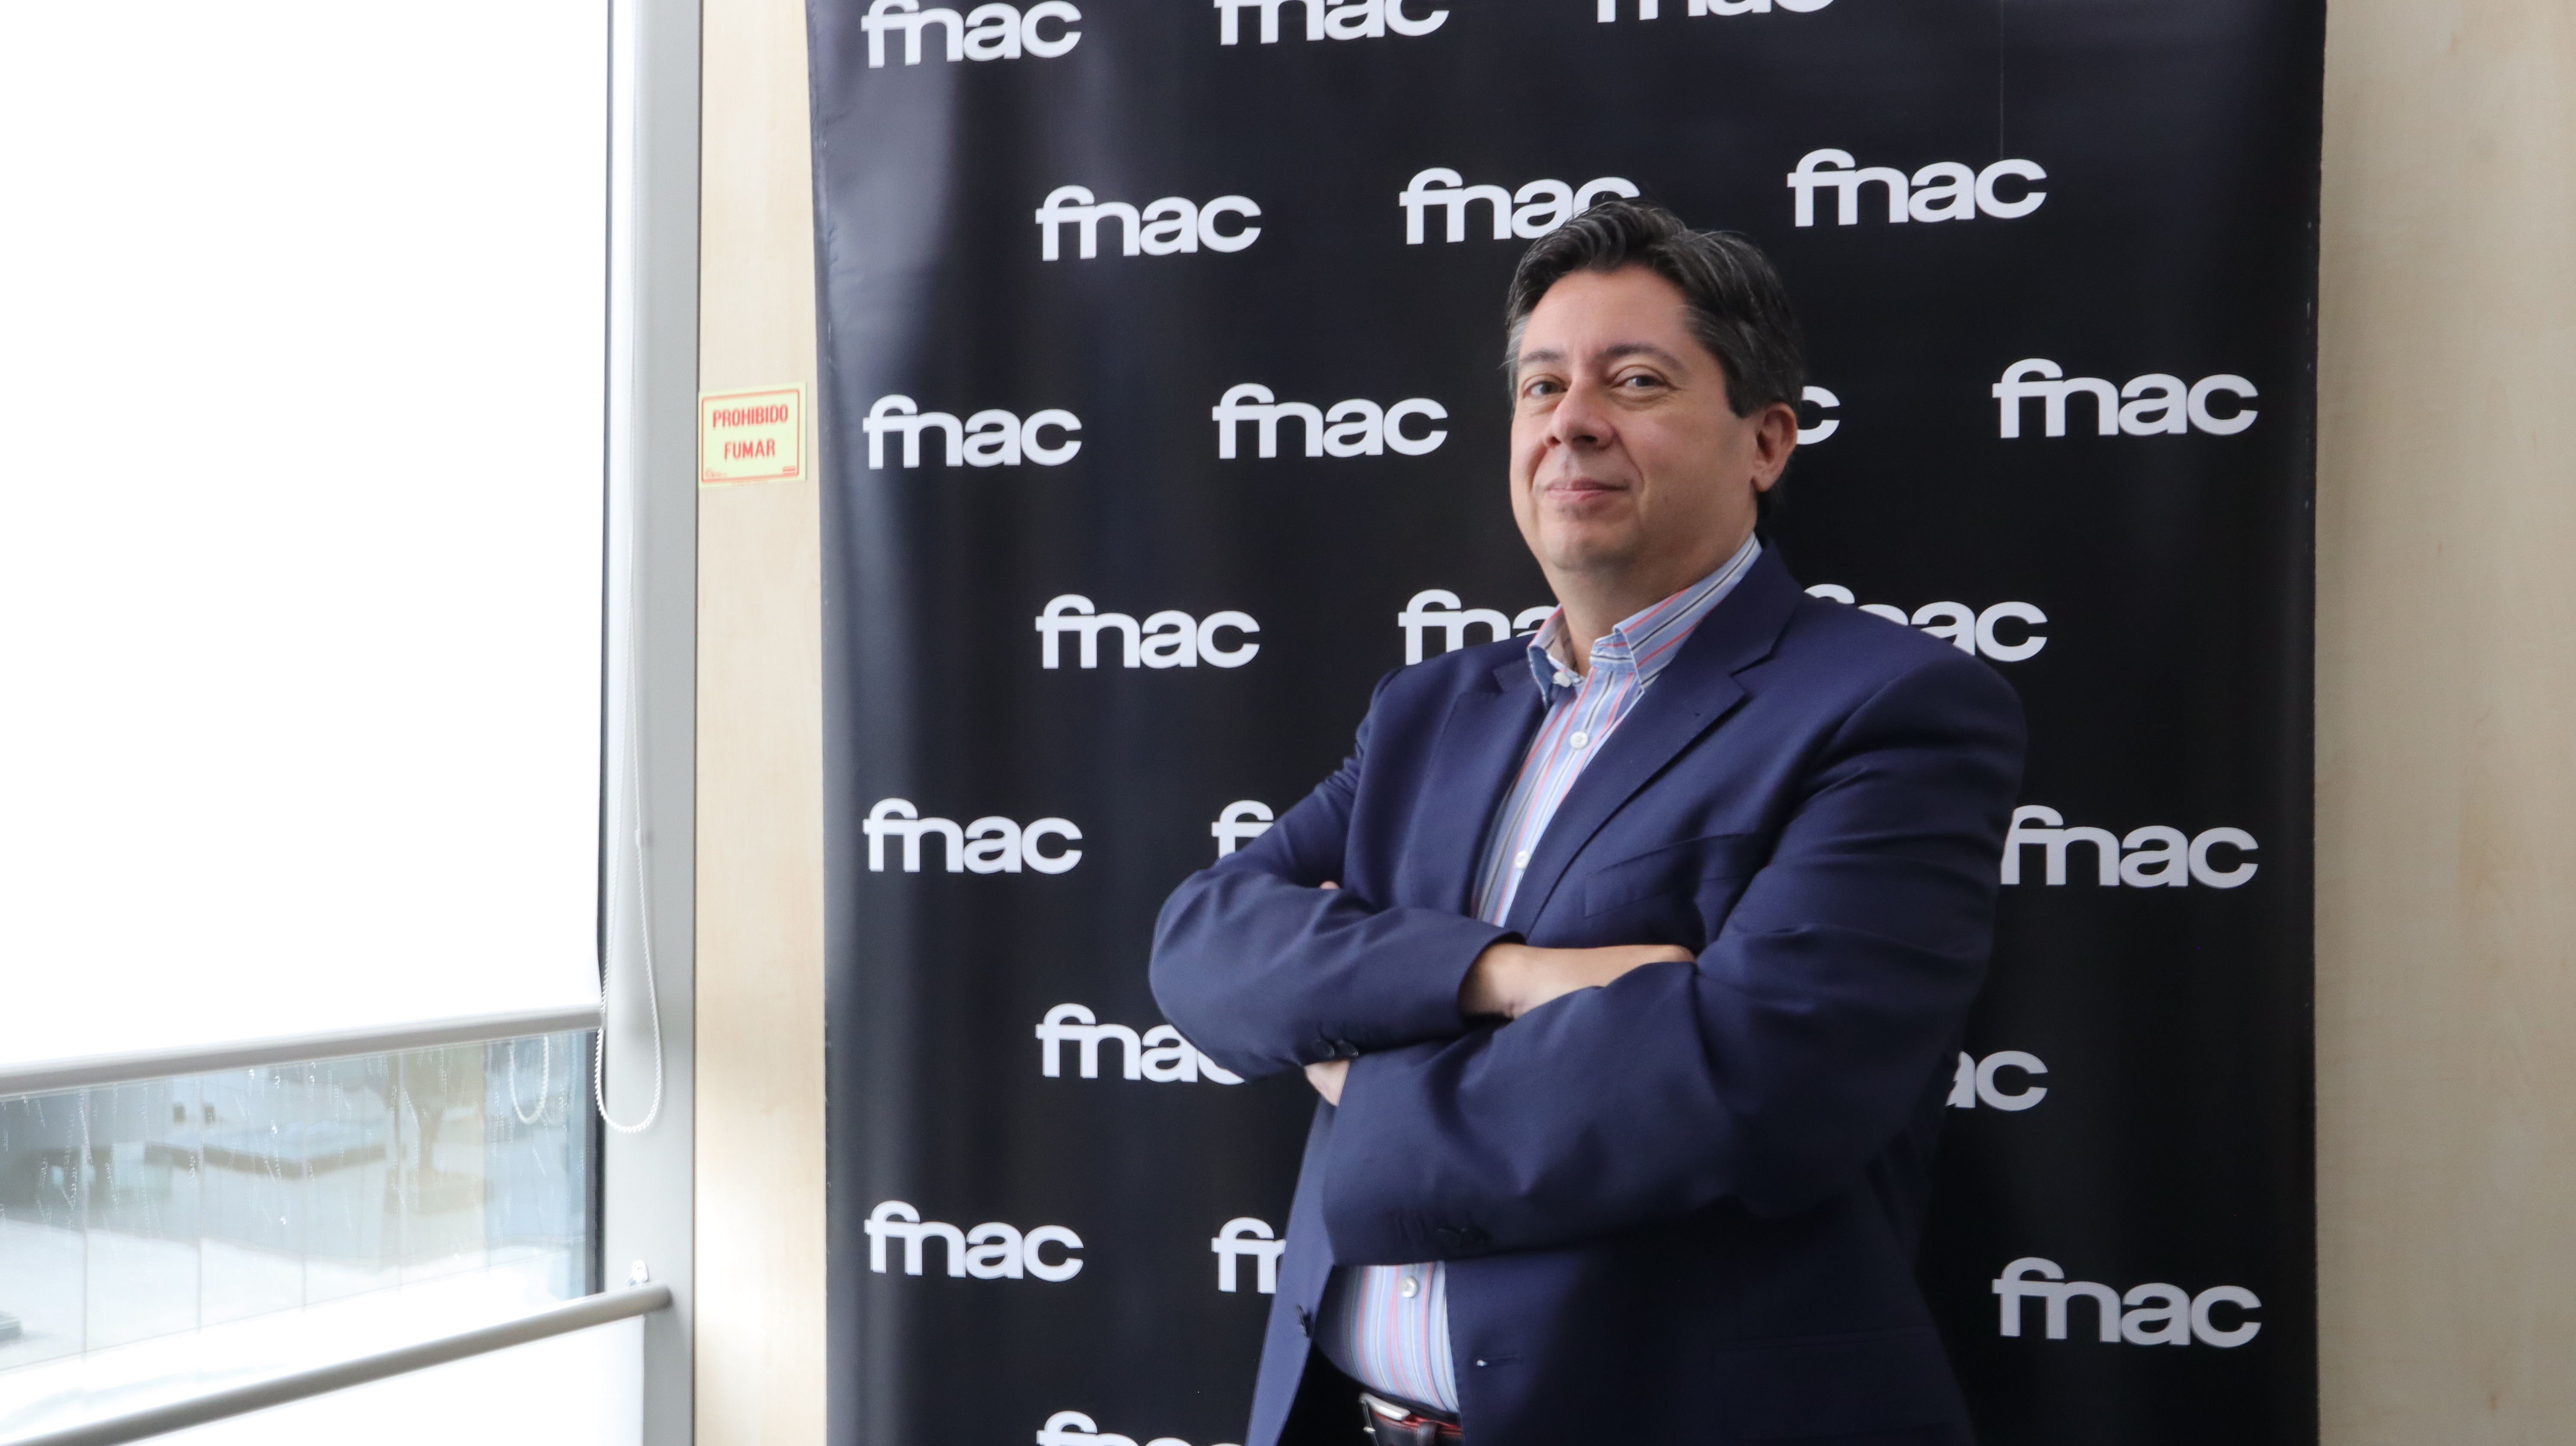 Armando Gómez, responsible for well-being and occupational medicine at Fnac.